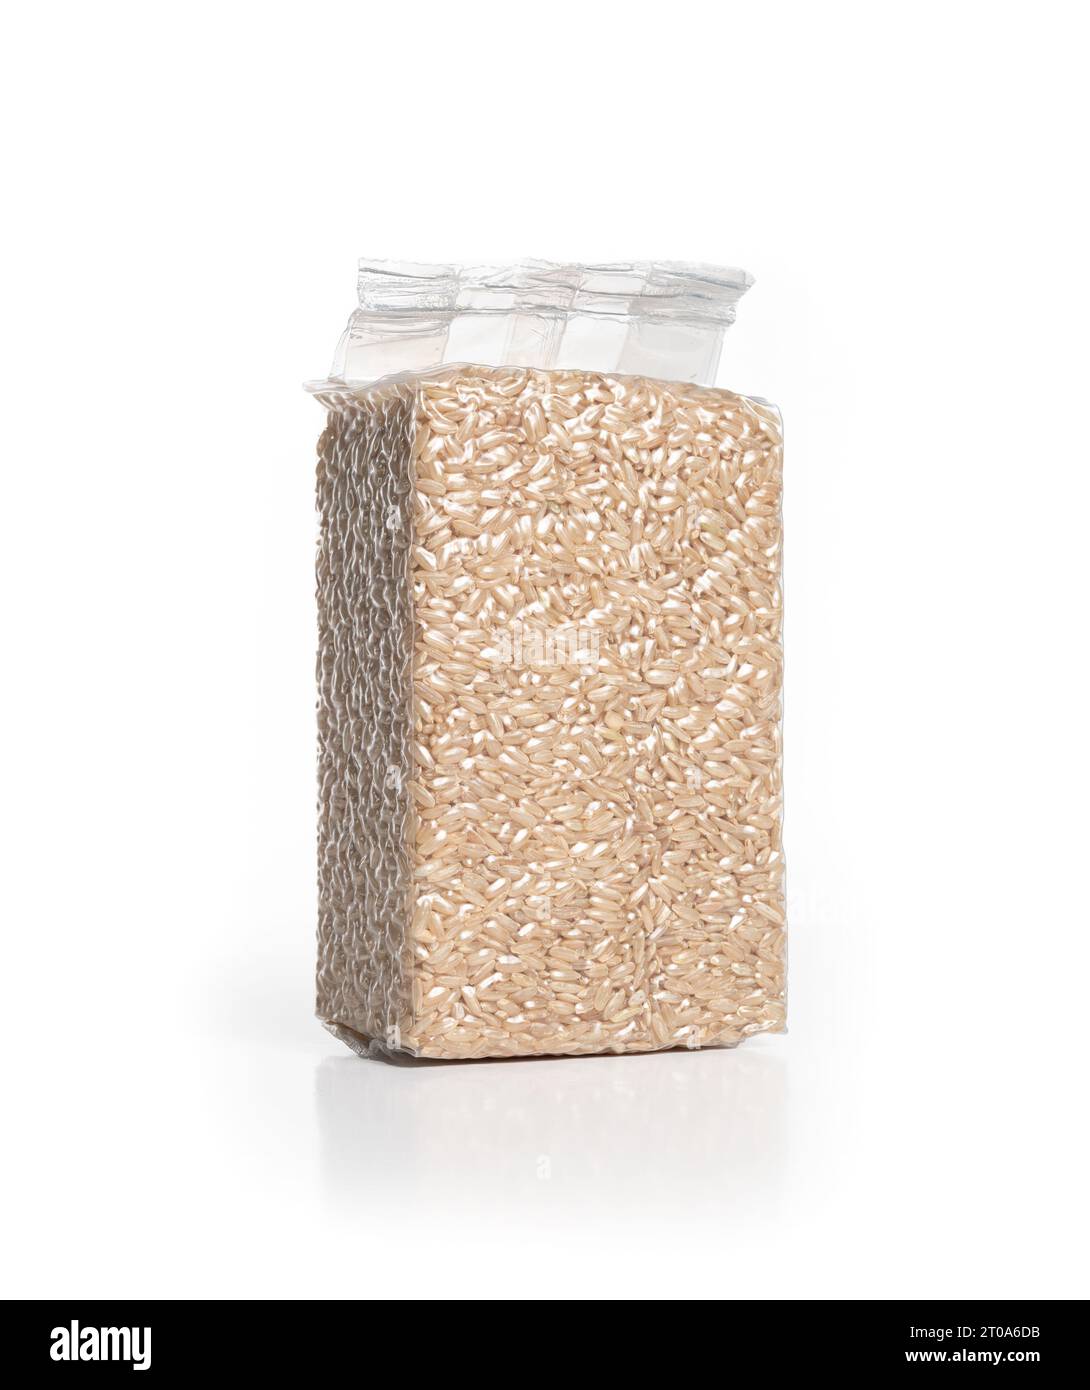 Brown short-grain rice in plastic package. Perspective view of dry and raw rice in store bought vaccume sealed packaging. Stock Photo